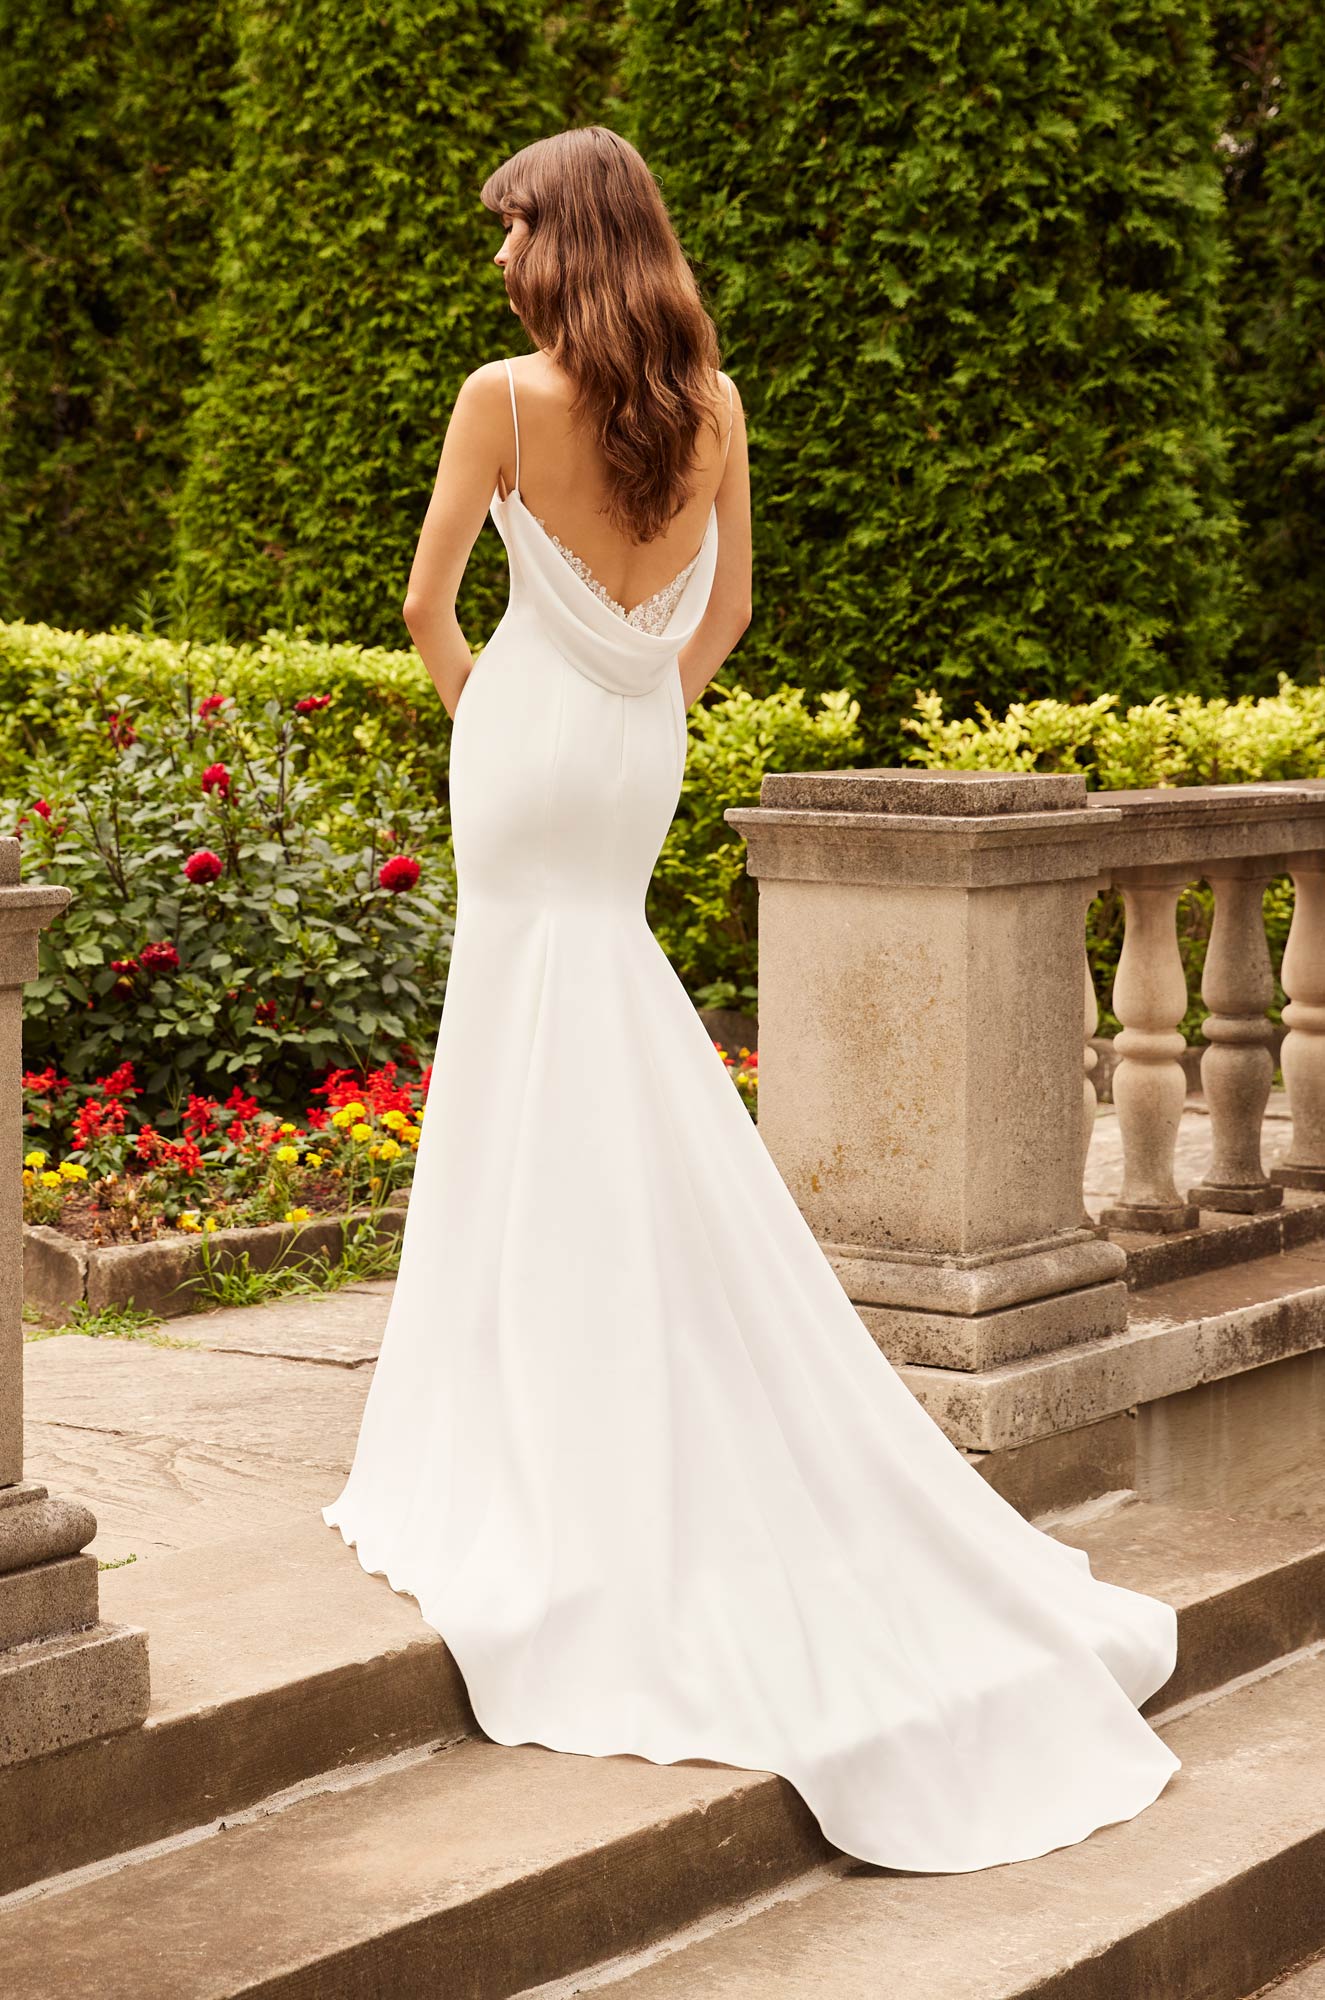 A Square Necked with Thin Straps Sleeveless Plain Crepe Wedding Dress, with detachable draped cowl low back and lace and sequin detail, and, a sexy slit